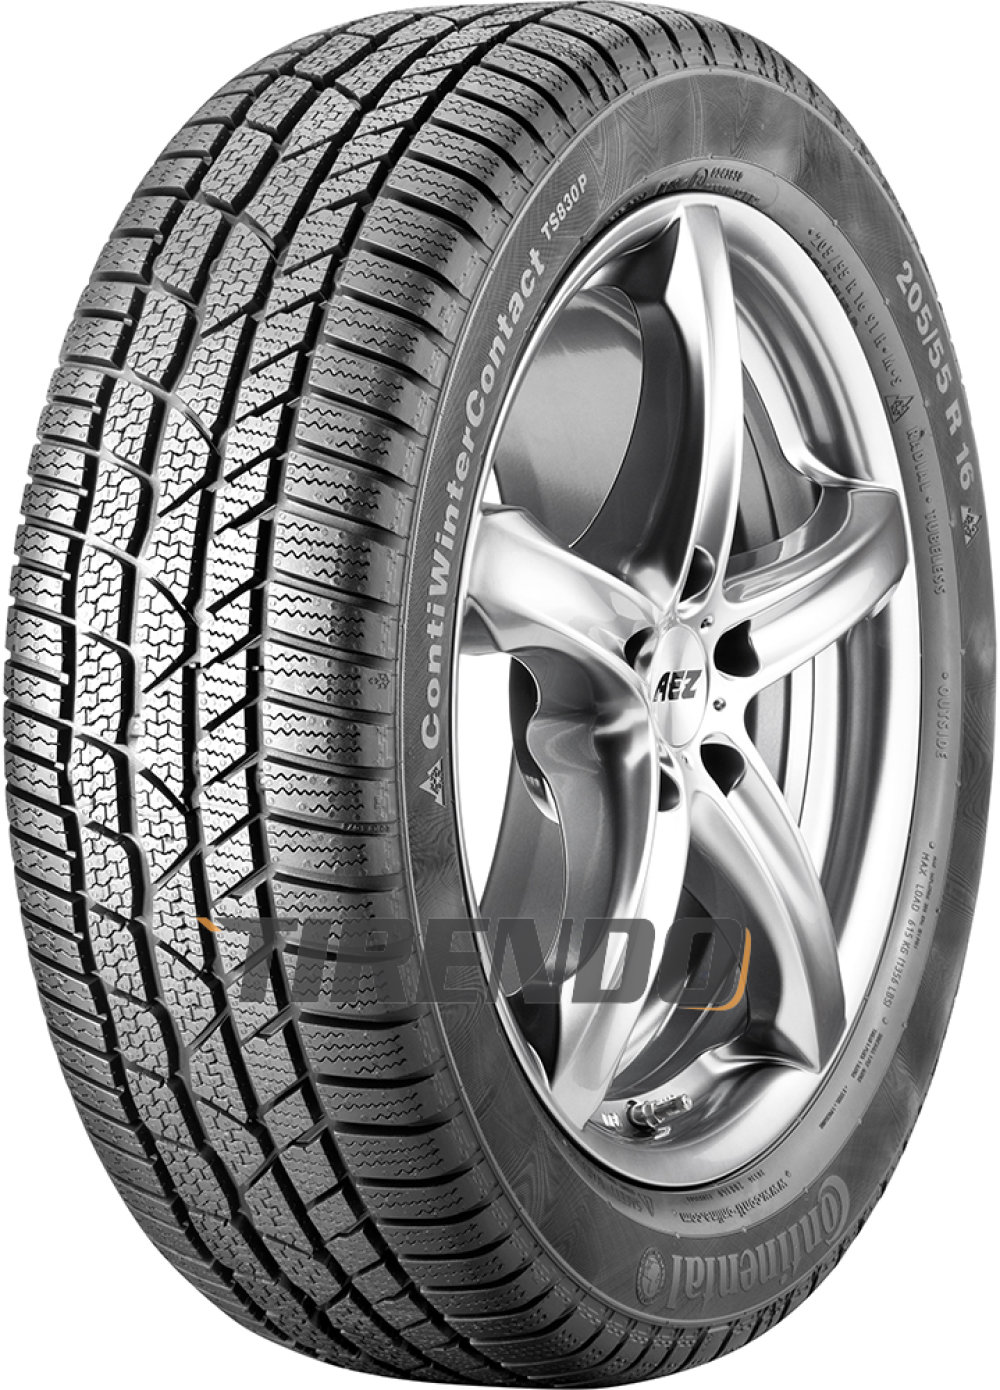 Image of Continental ContiWinterContact TS 830P ( 205/60 R16 96H XL Conti Seal )